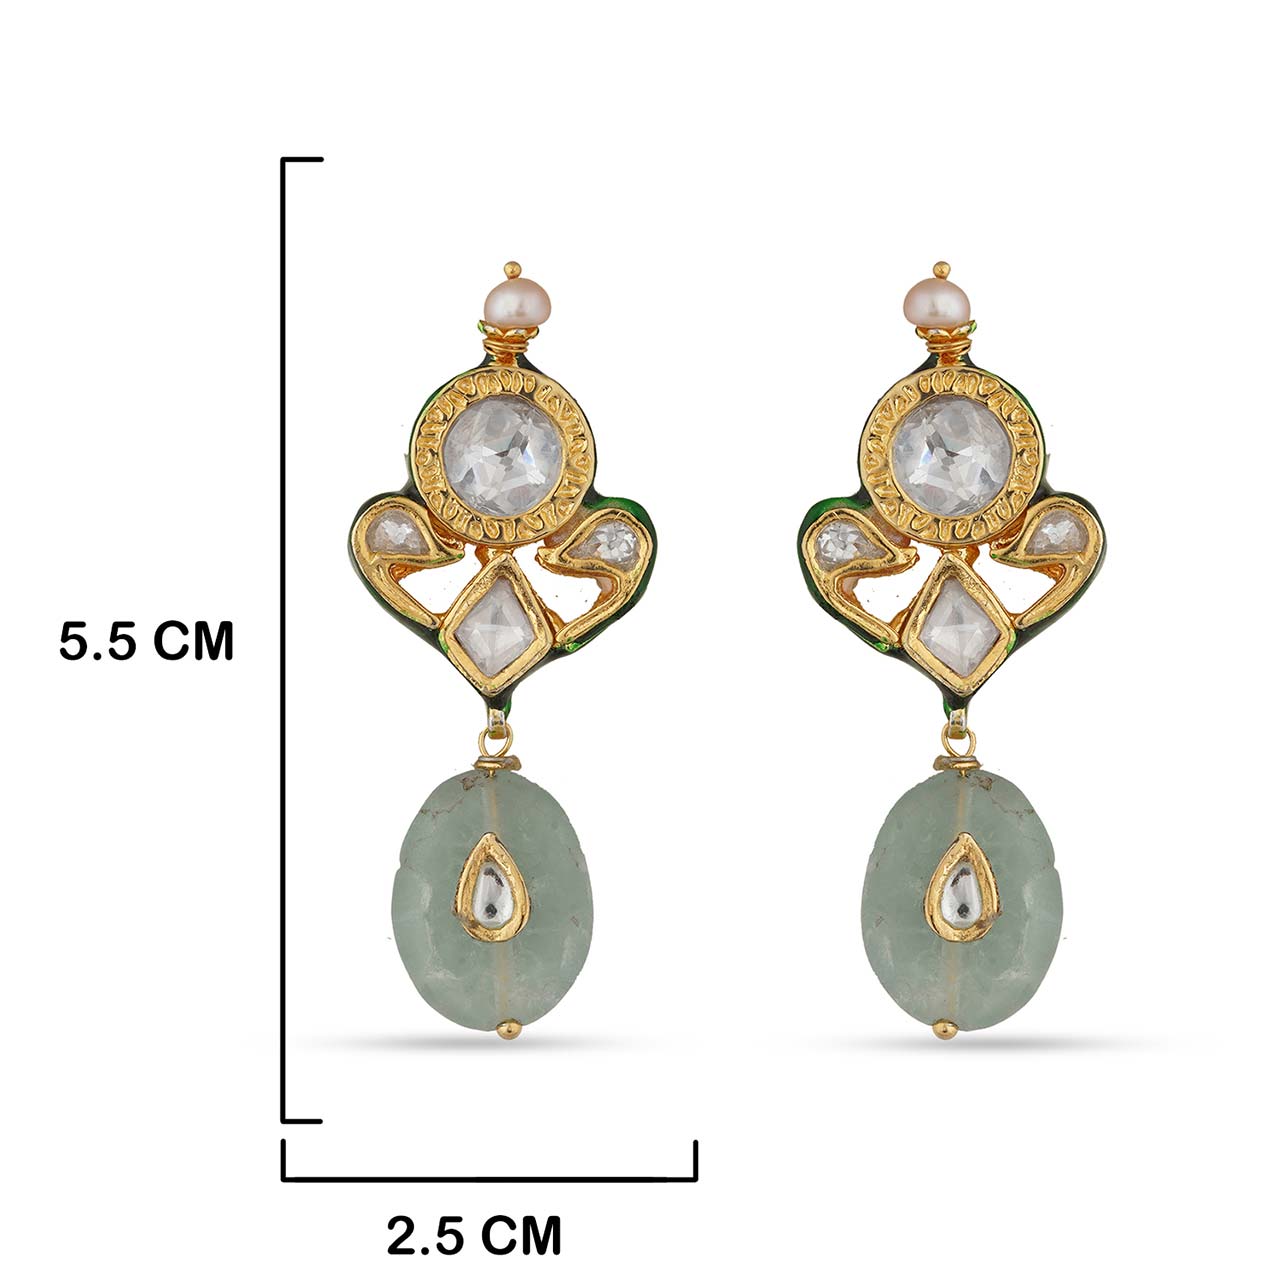 Green and Yellow Polki Earrings with Measurements in cm